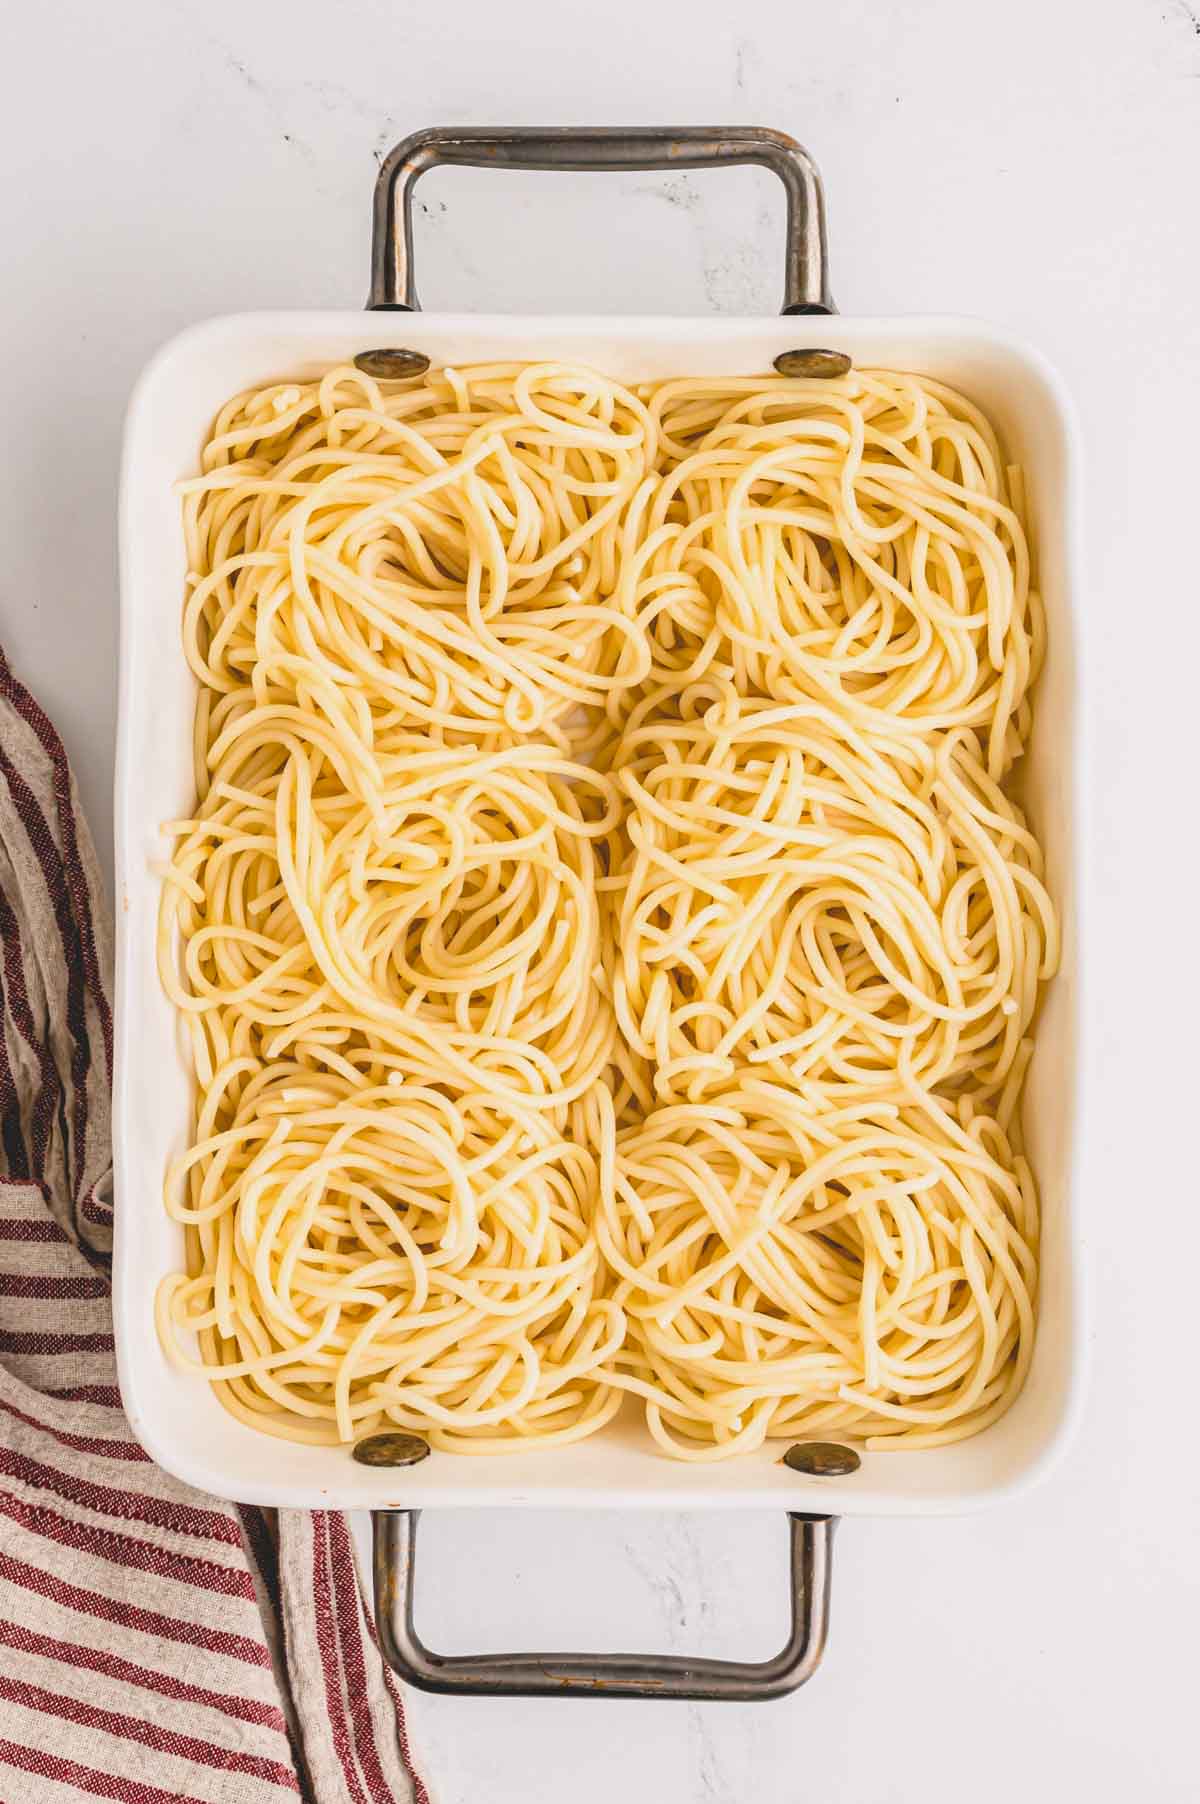 Cooked spaghetti nests in a baking dish.